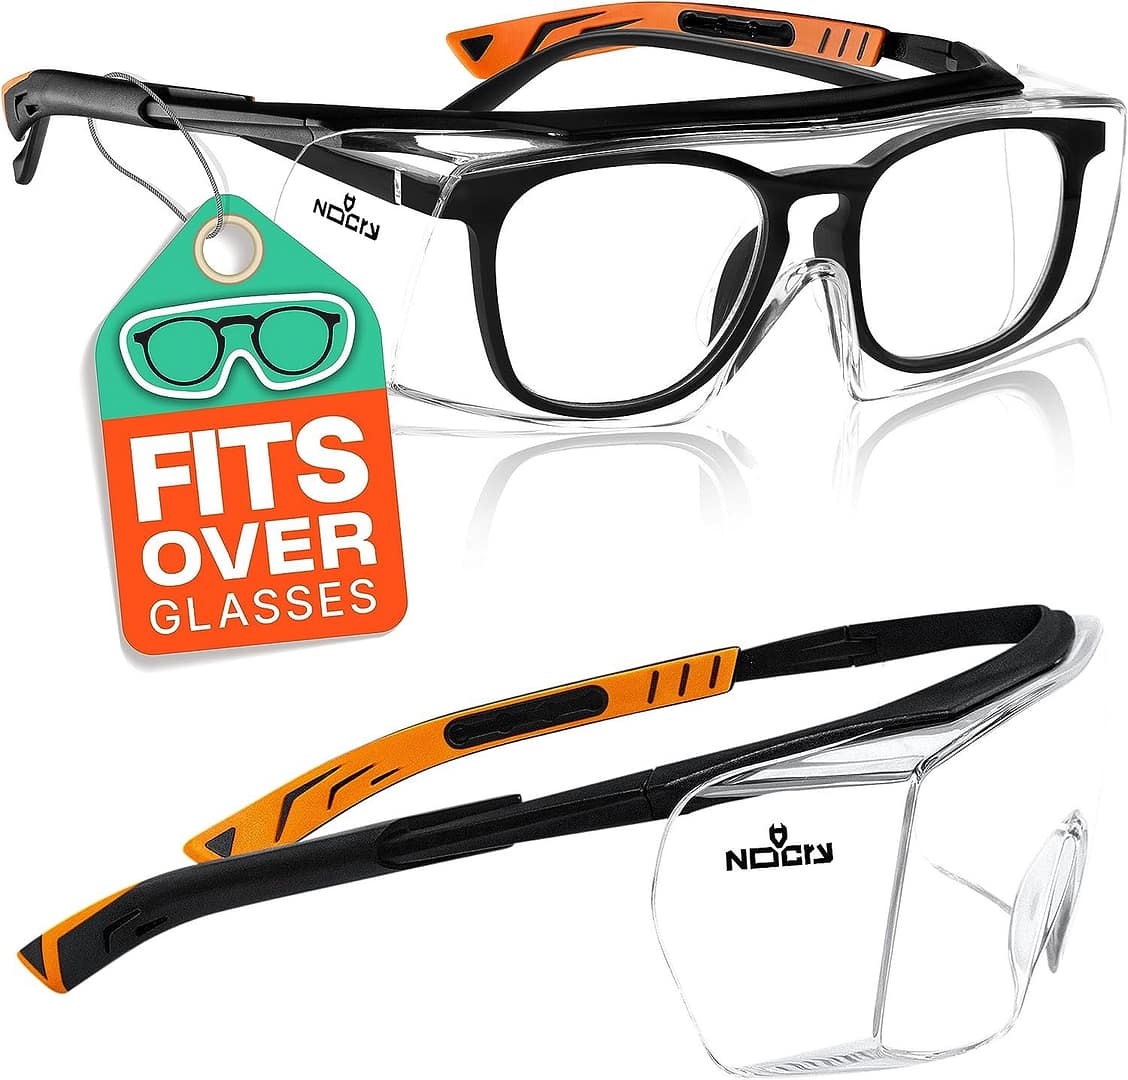 nocry safety glasses over eyeglasses review